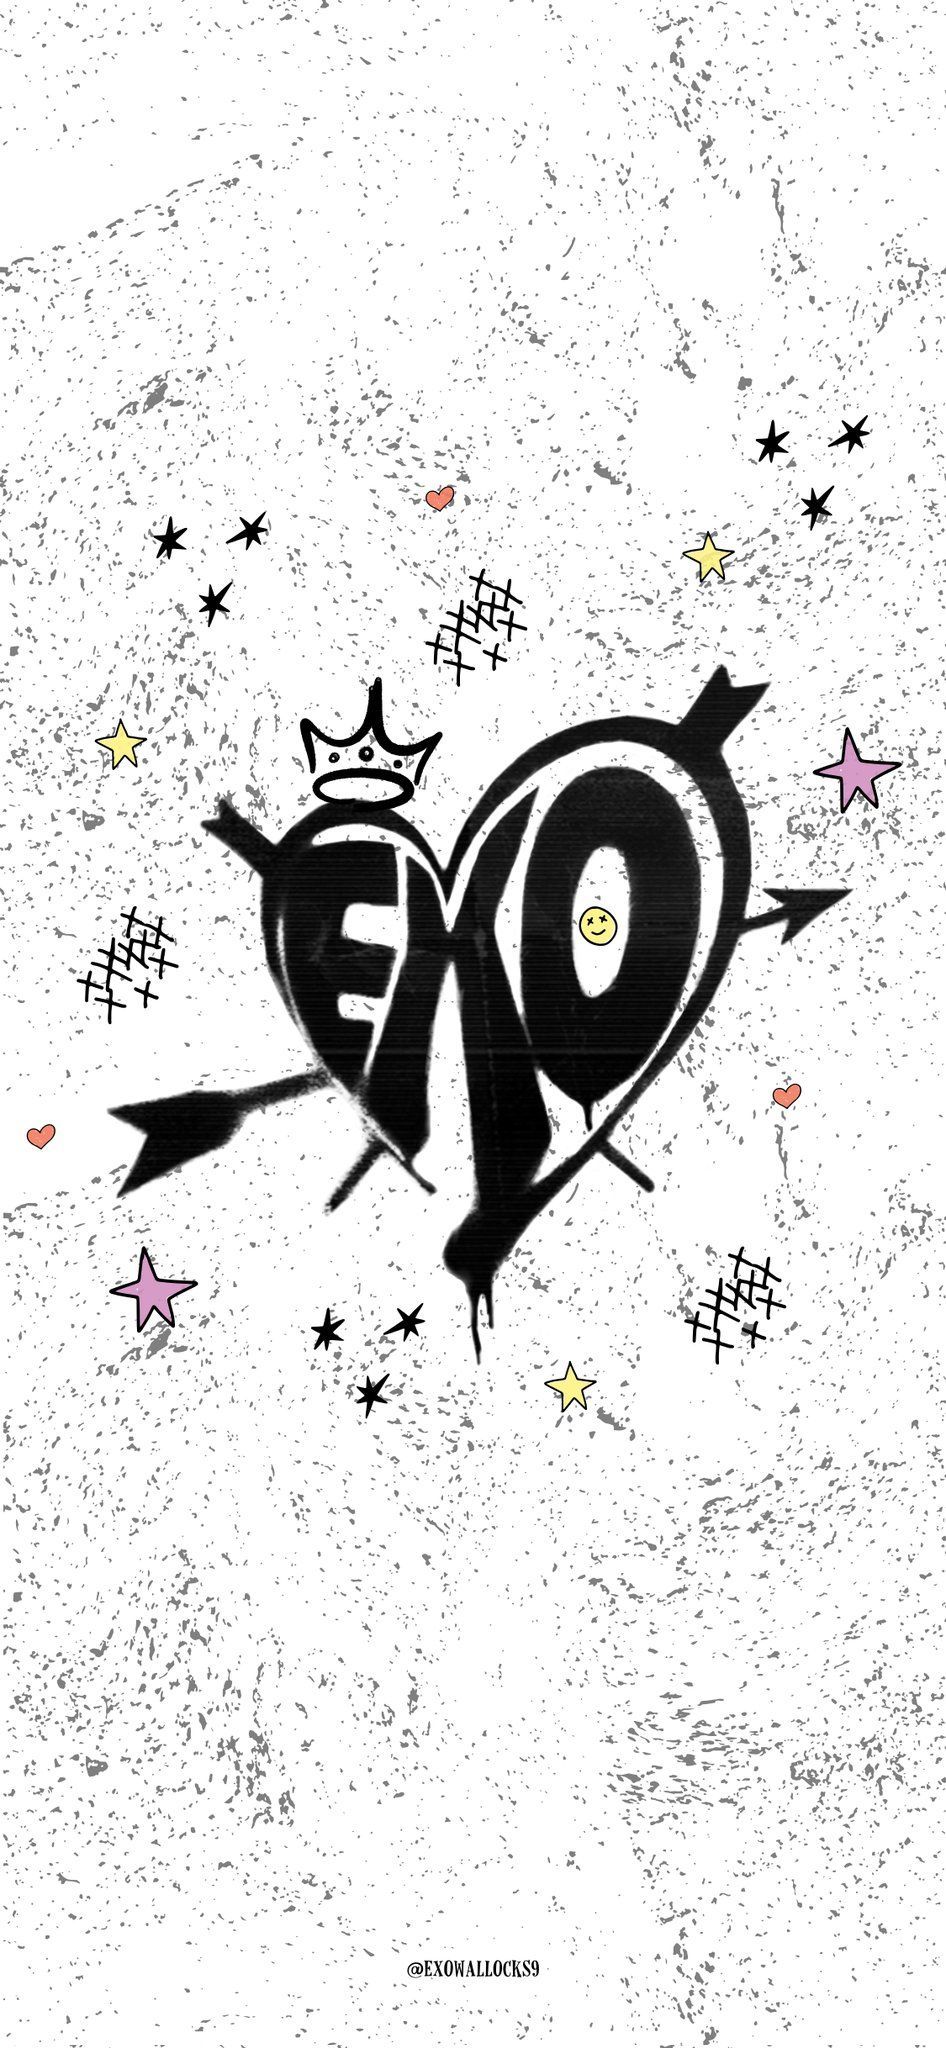 exo wallpaper hd 2020 for Android - Download | Cafe Bazaar